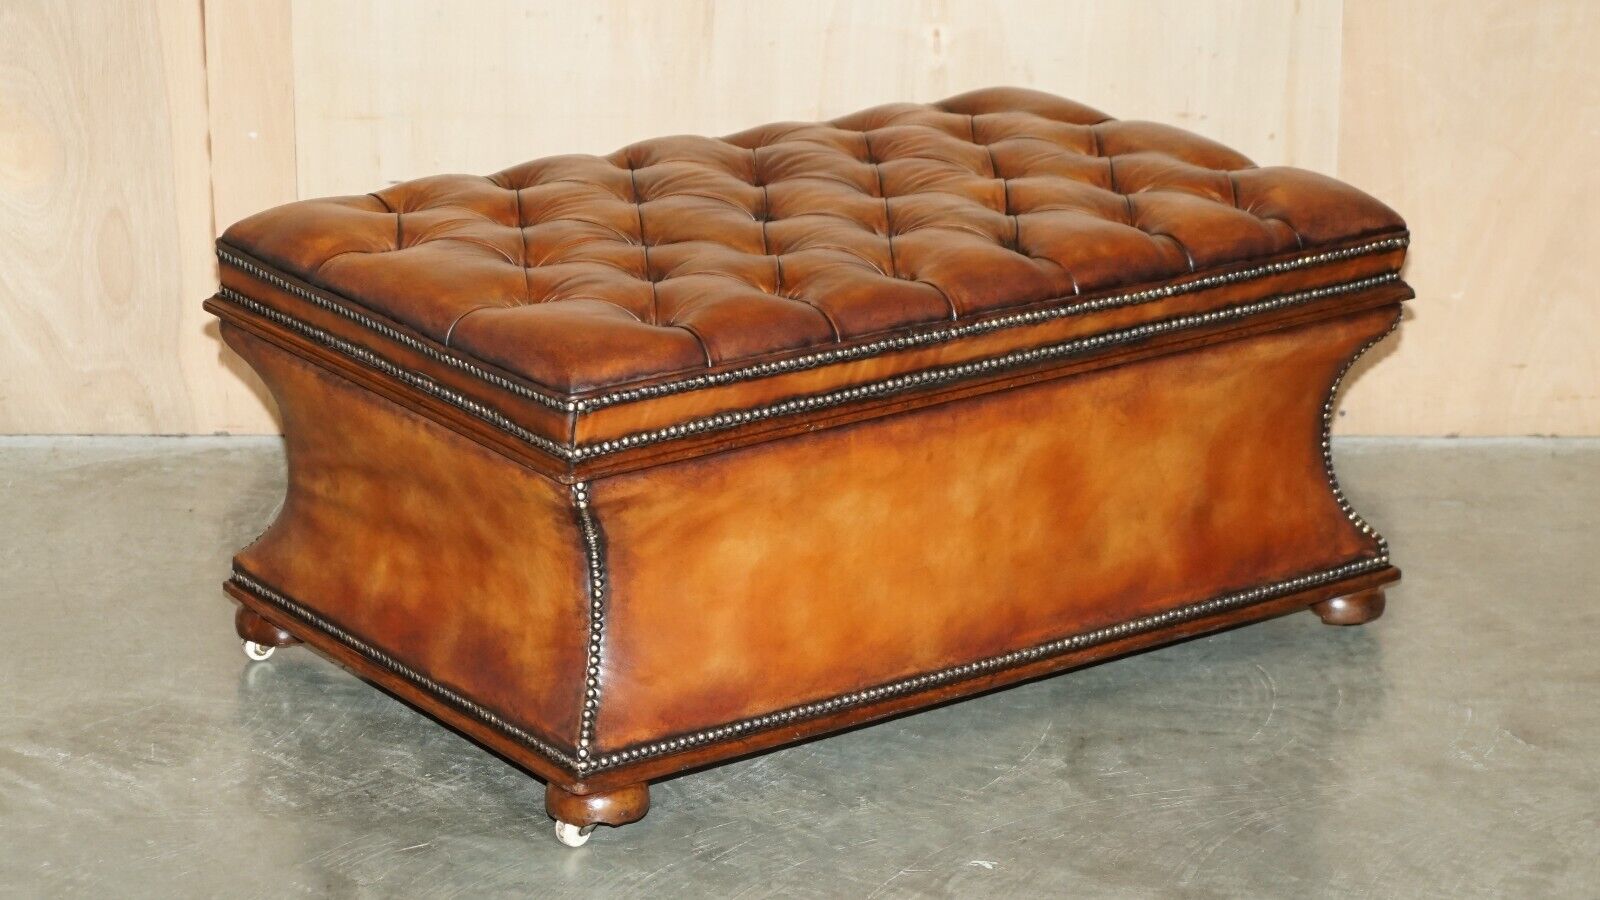 FULLY RESTORED ANTIQUE VICTORIAN BROWN LEATHER CHESTERFIELD TUFTED OTTOMAN STOOL